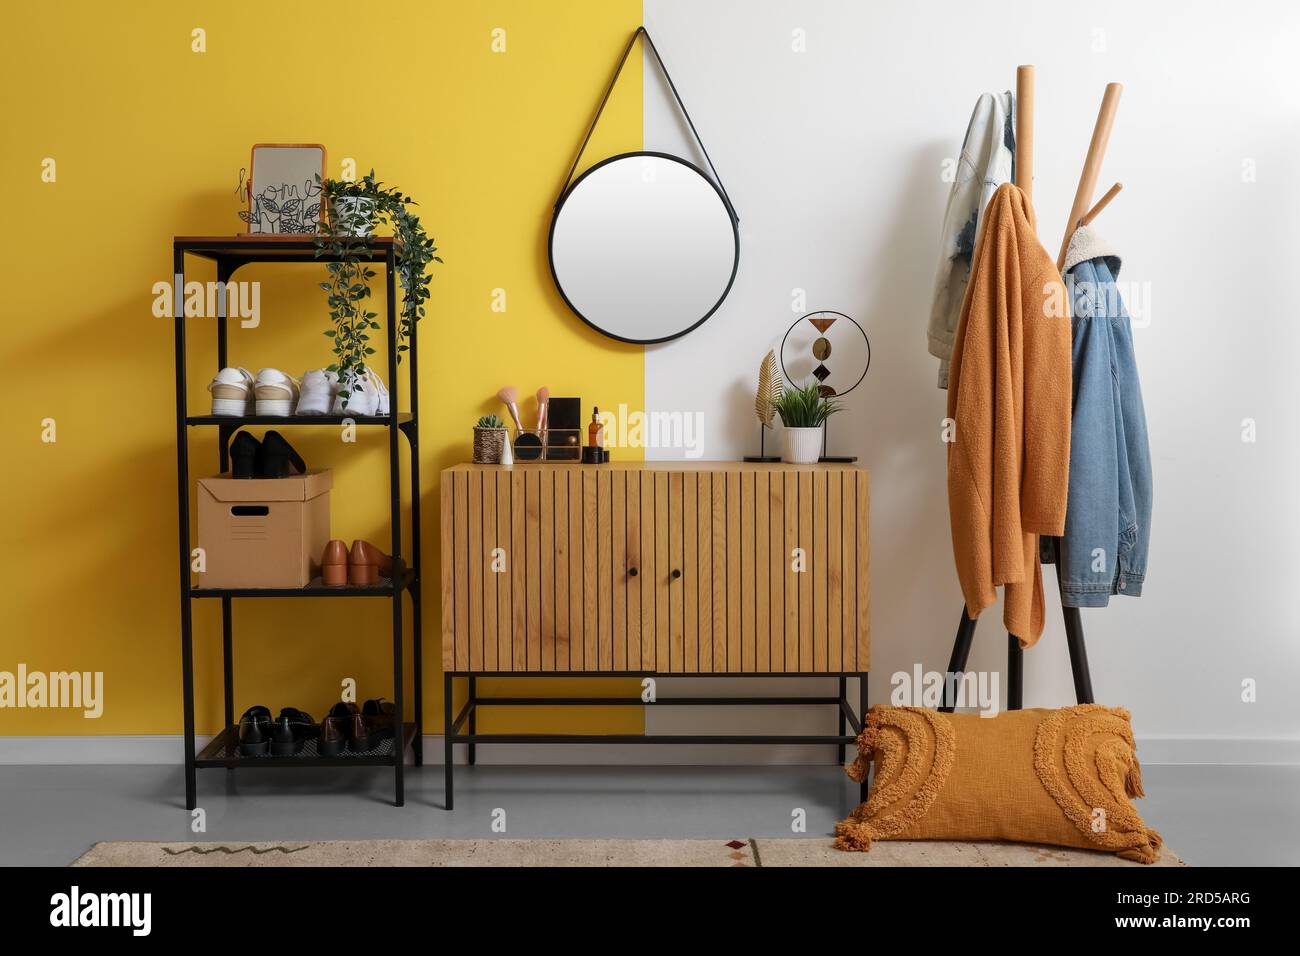 Interior of stylish hallway with mirror, wooden cabinet, shoe stand and rack Stock Photo